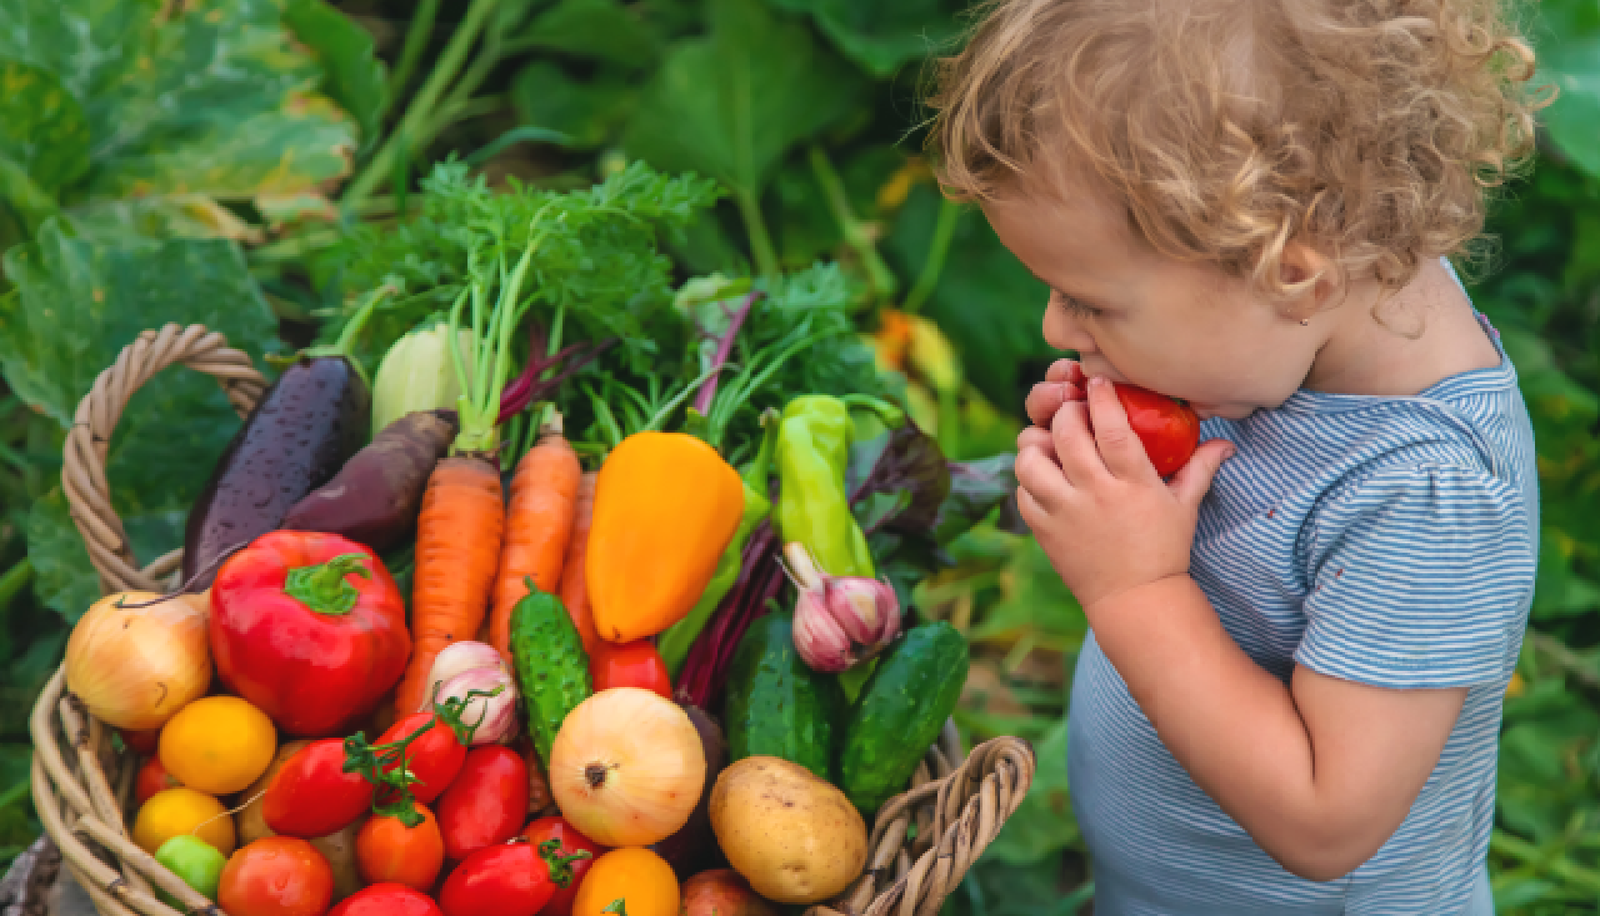 How to add more nutrients to your child's diet - Anan International School Blog